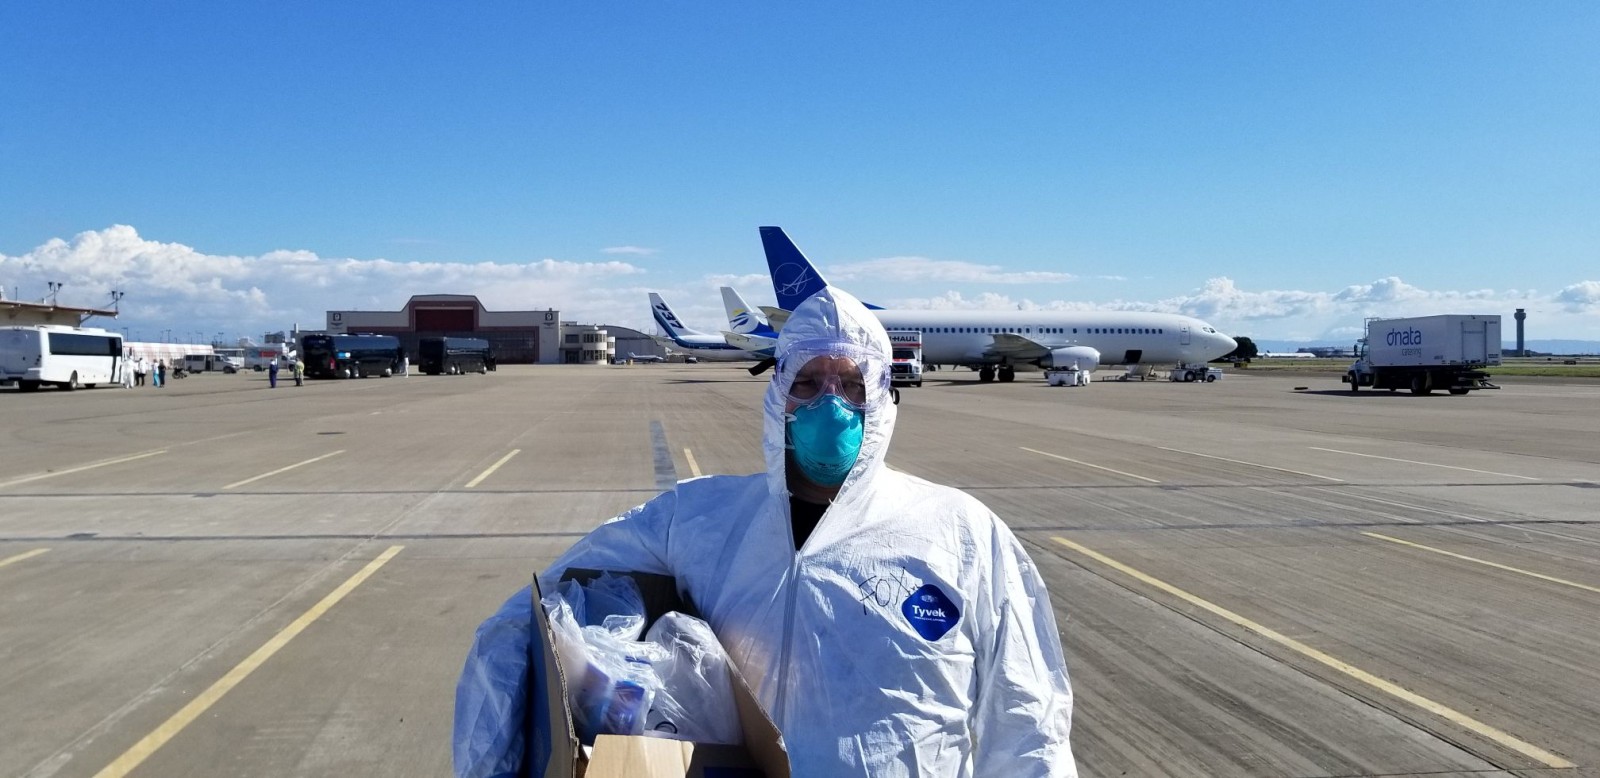 Dr. Adam Fox ’92, an associate professor of surgery at Rutgers University-New Jersey Medical School and medical director at JEMSTAR, the New Jersey Emergency Medical Services Helicopter Response Program, suited up for his work with the National Disaster Medical System.